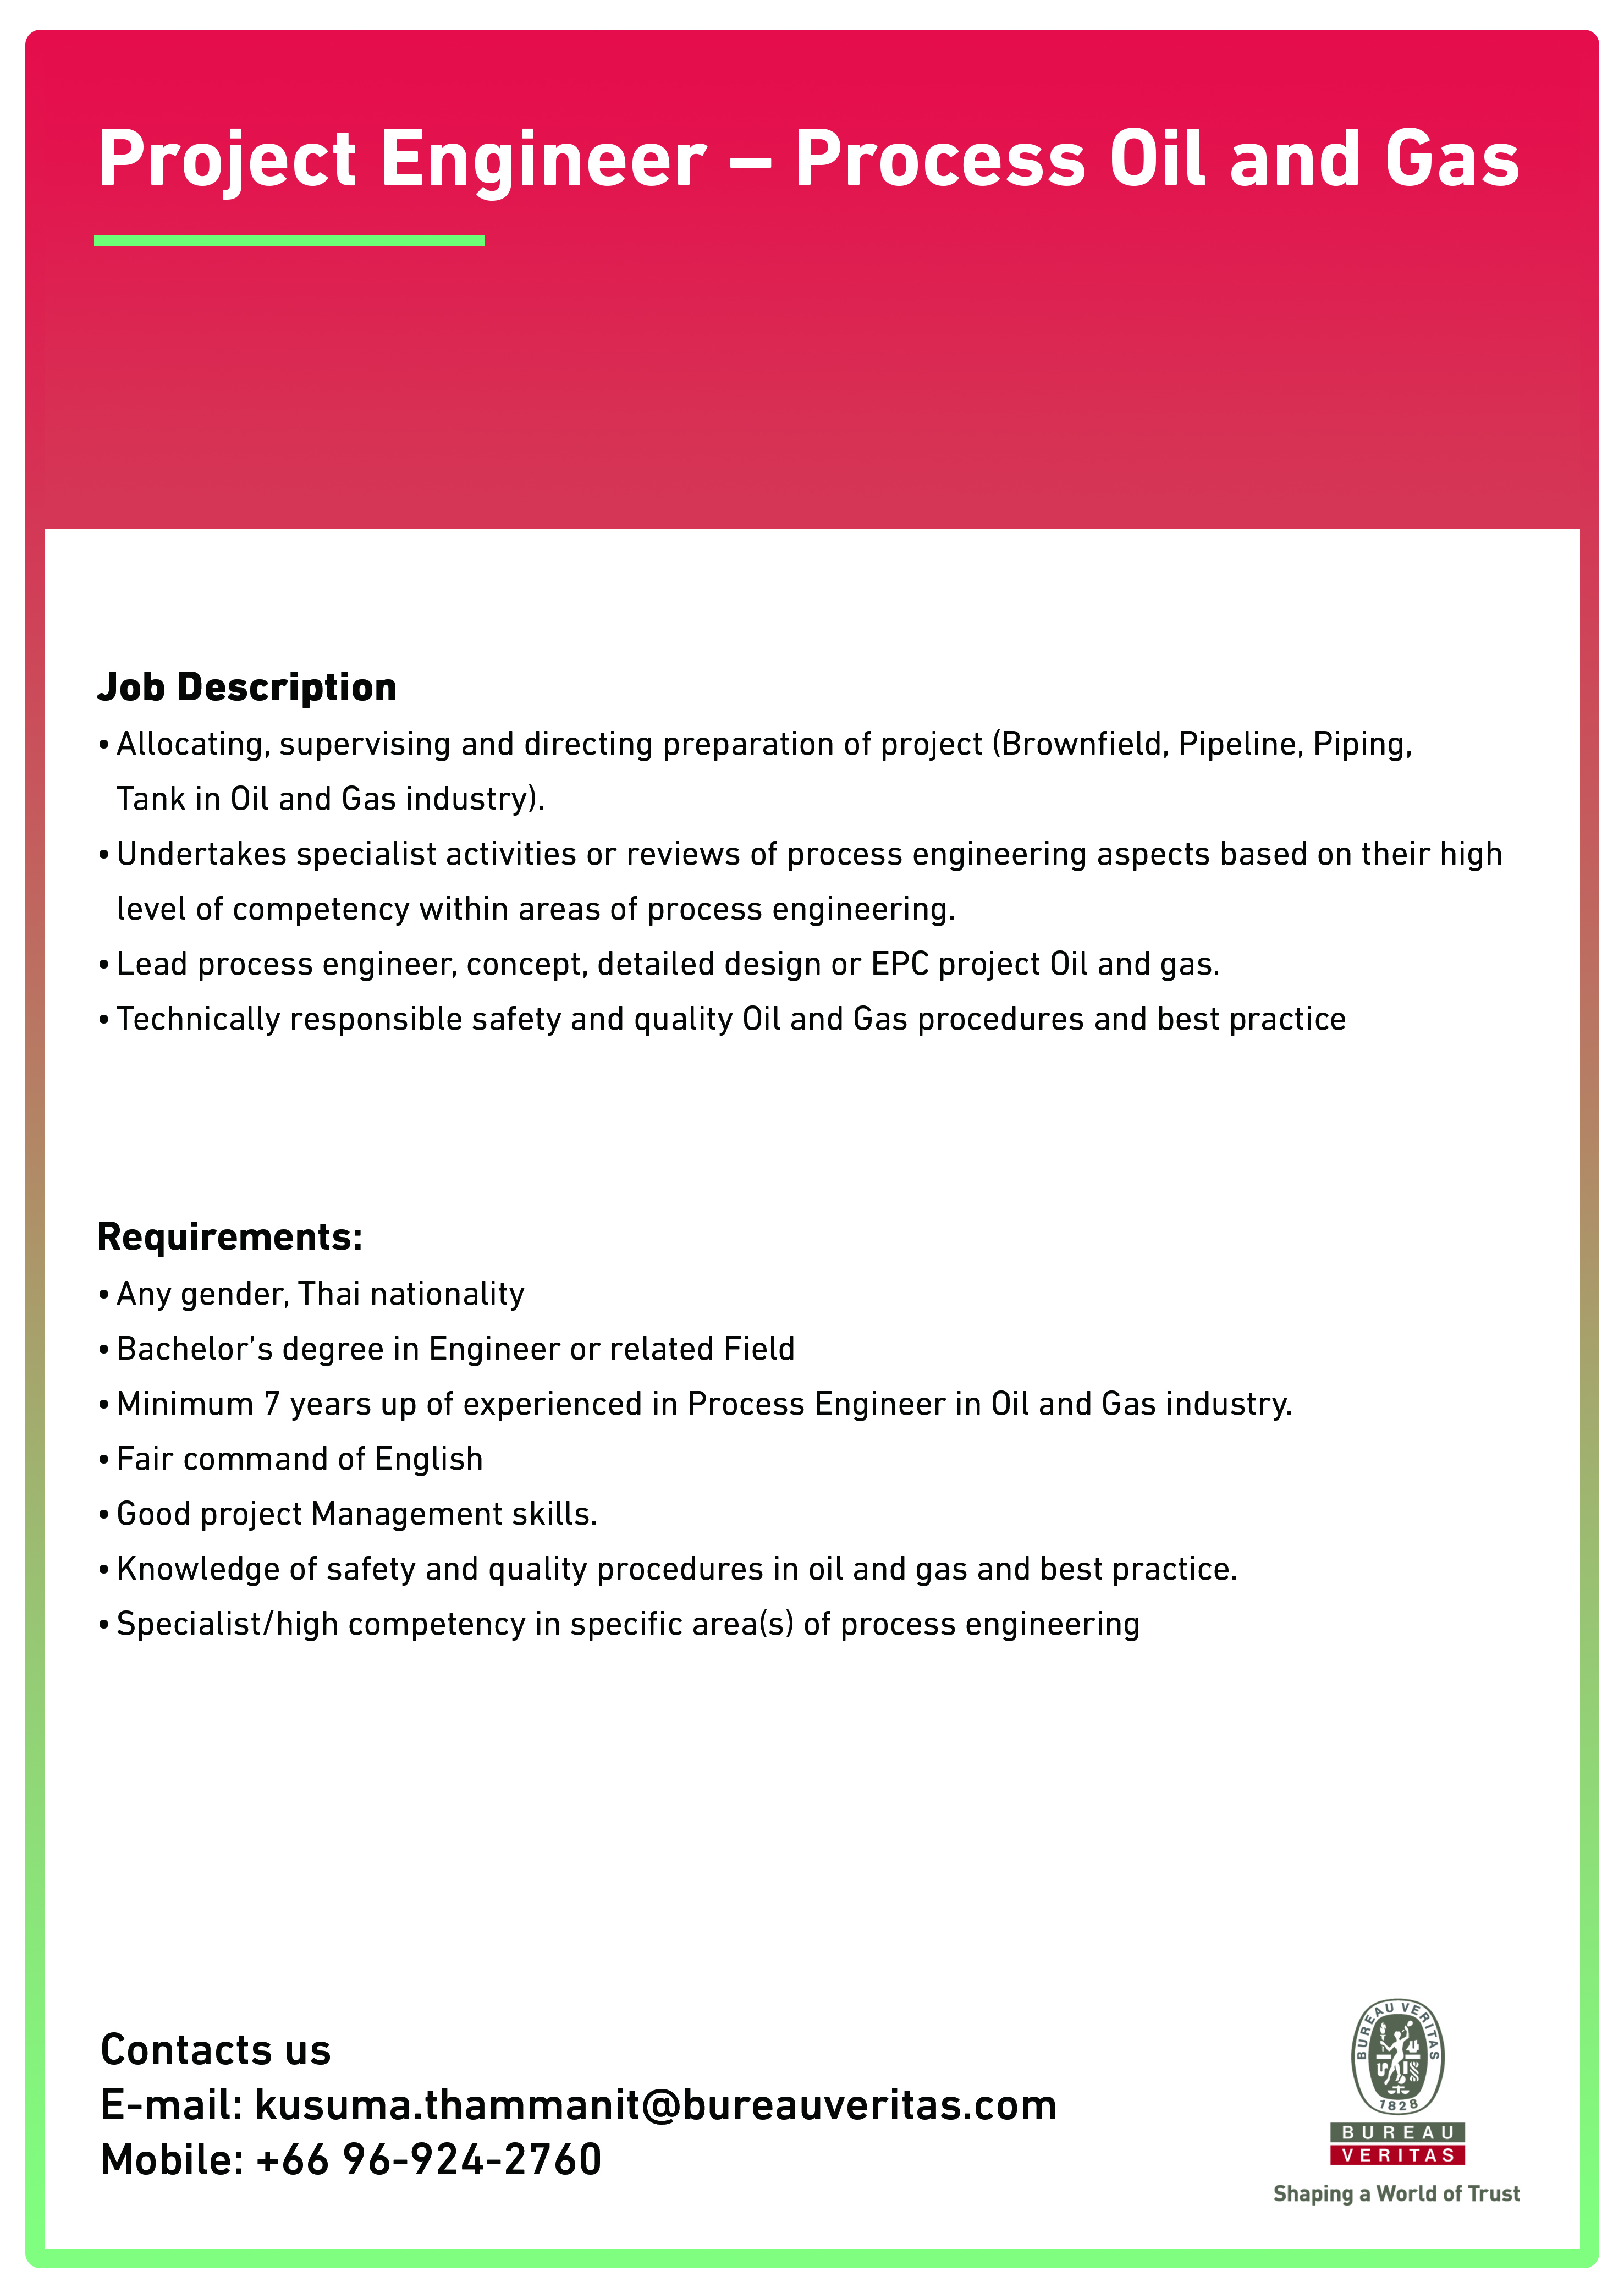 BV job offer - Project Engineer – Process Oil and Gas 